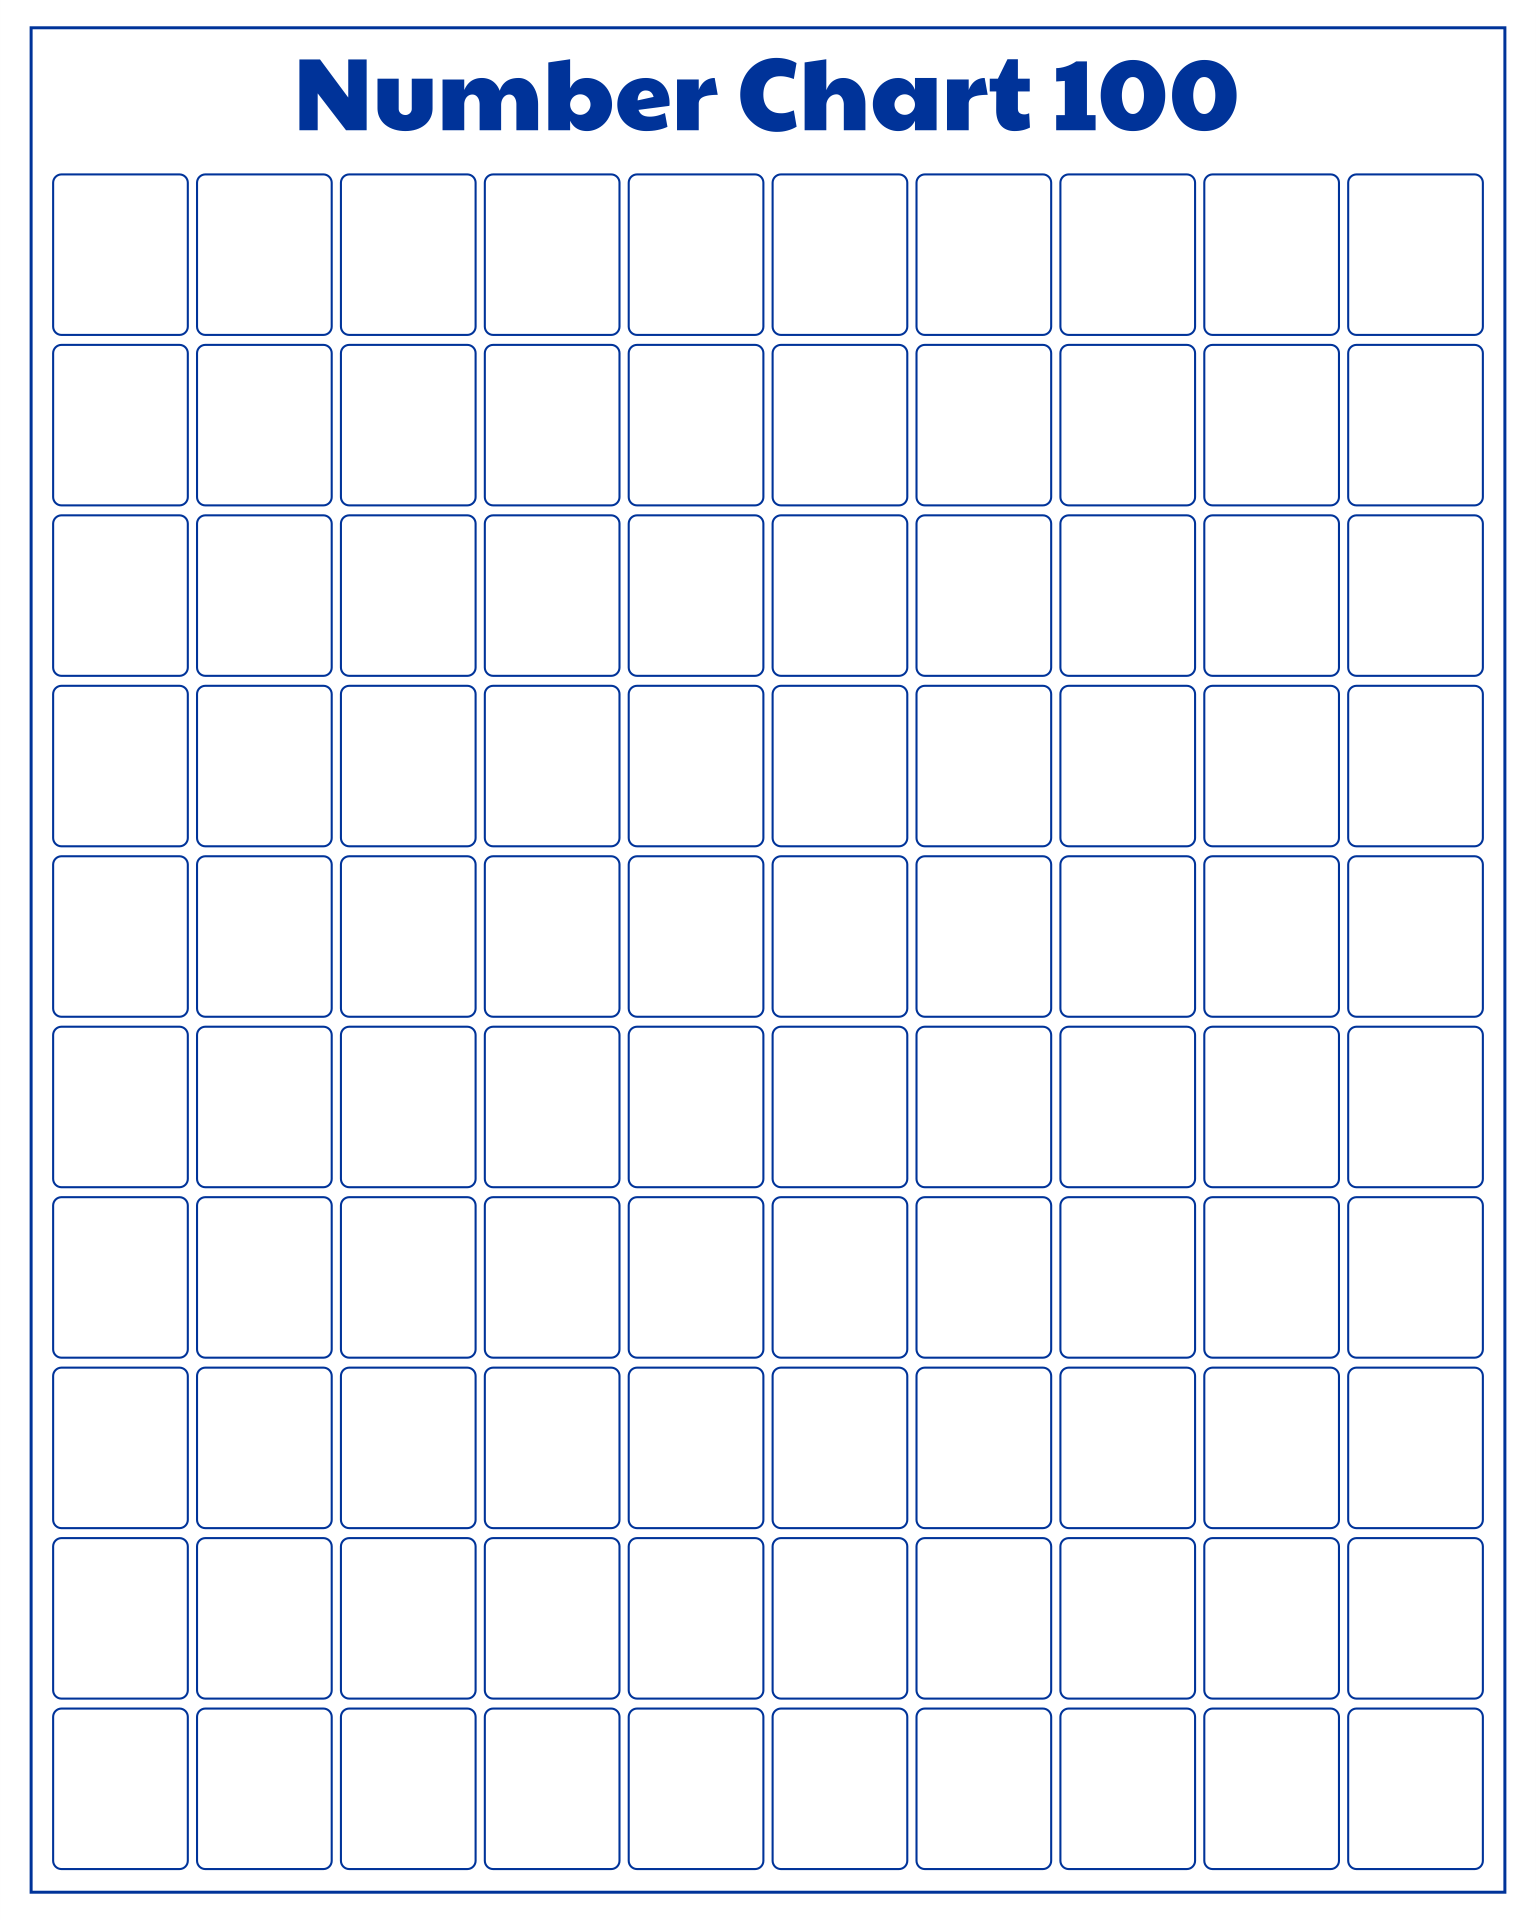 Hundreds Chart Printable Including Blank Number Chart Counting To Images And Photos Finder